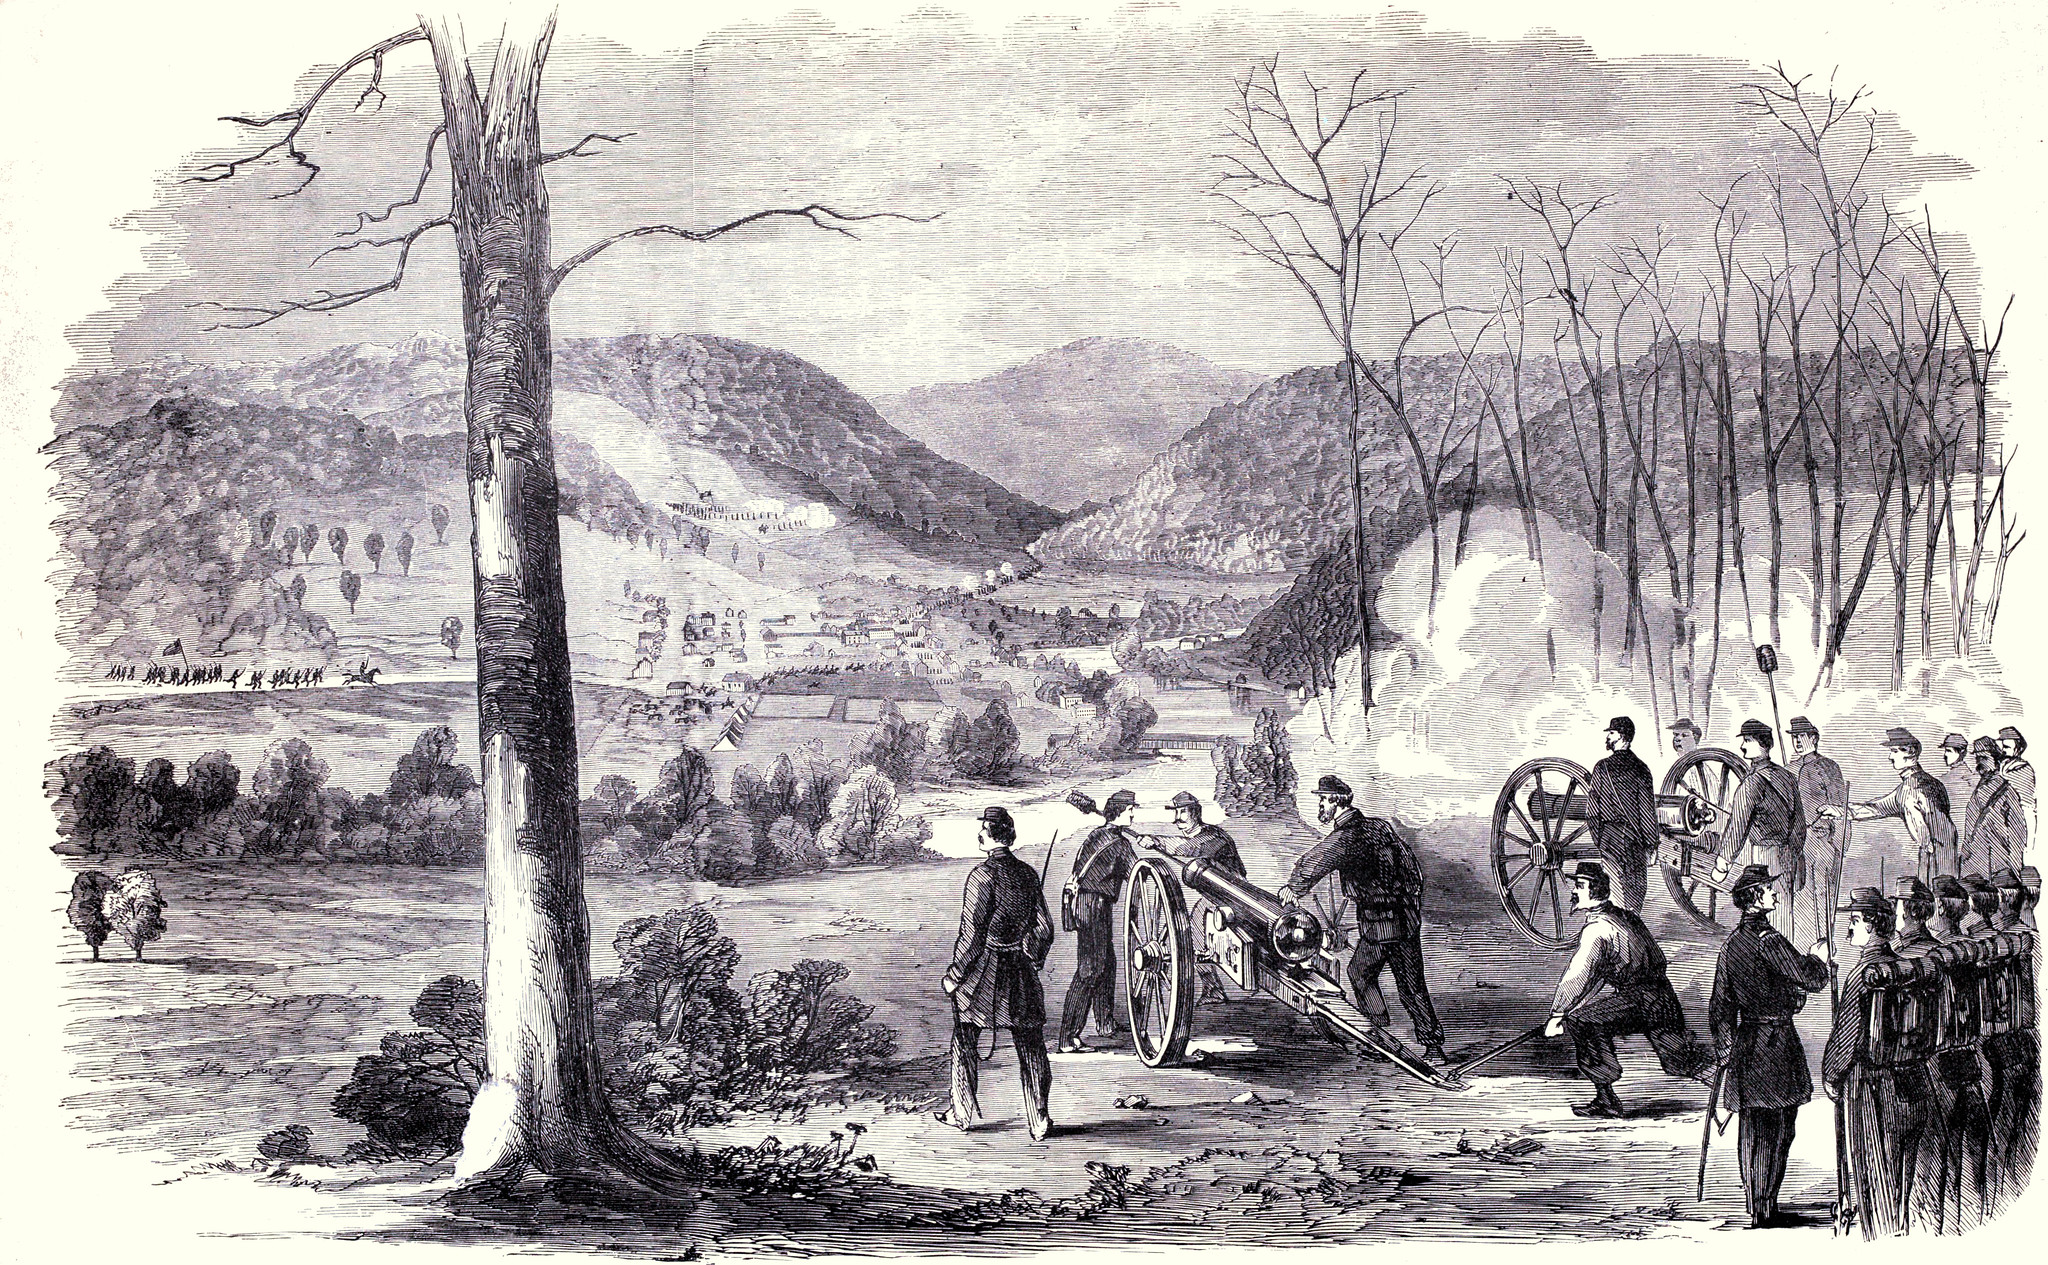 The Fight at Philippi, Va., June 3d, 1861—The United States Troops under Command of Colonel Dumont, Supported by Colonels Kelley and Lander, and the Confederates under Colonel Porterfield